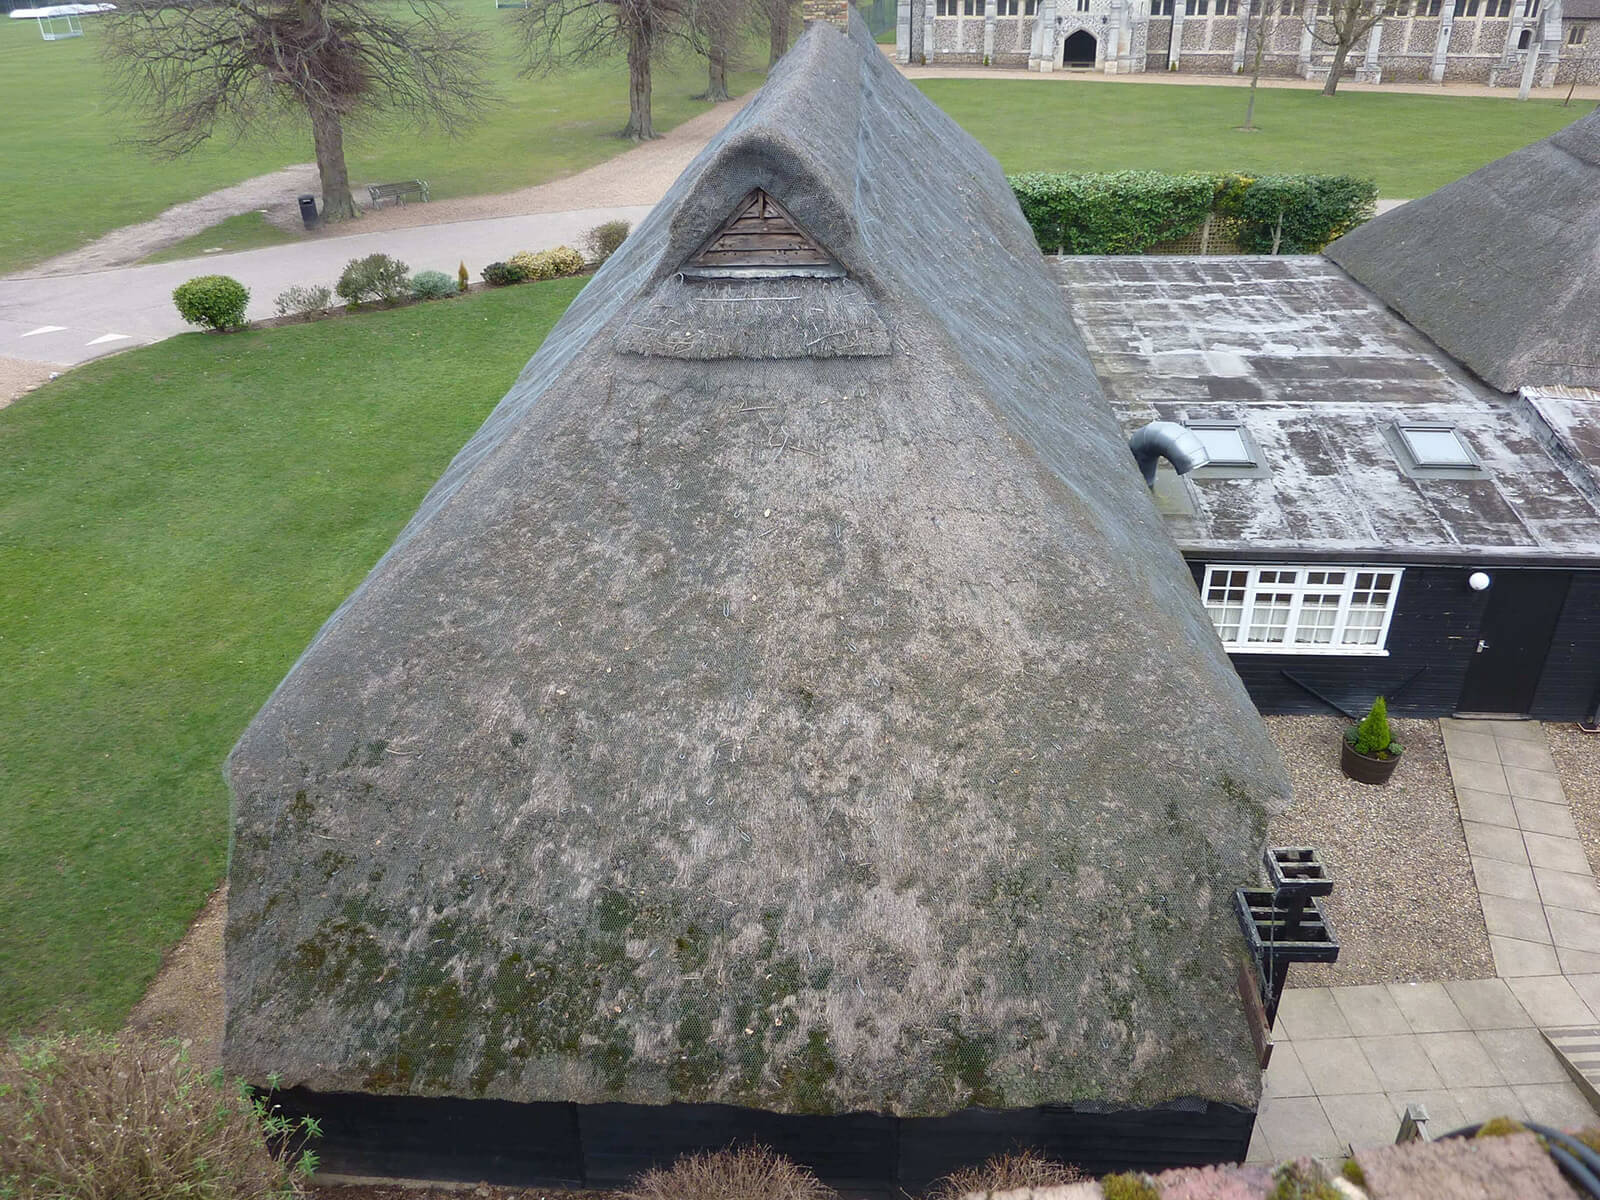 Gresham's School in Norfolk replaces thatch roof with Tileform Sheeting